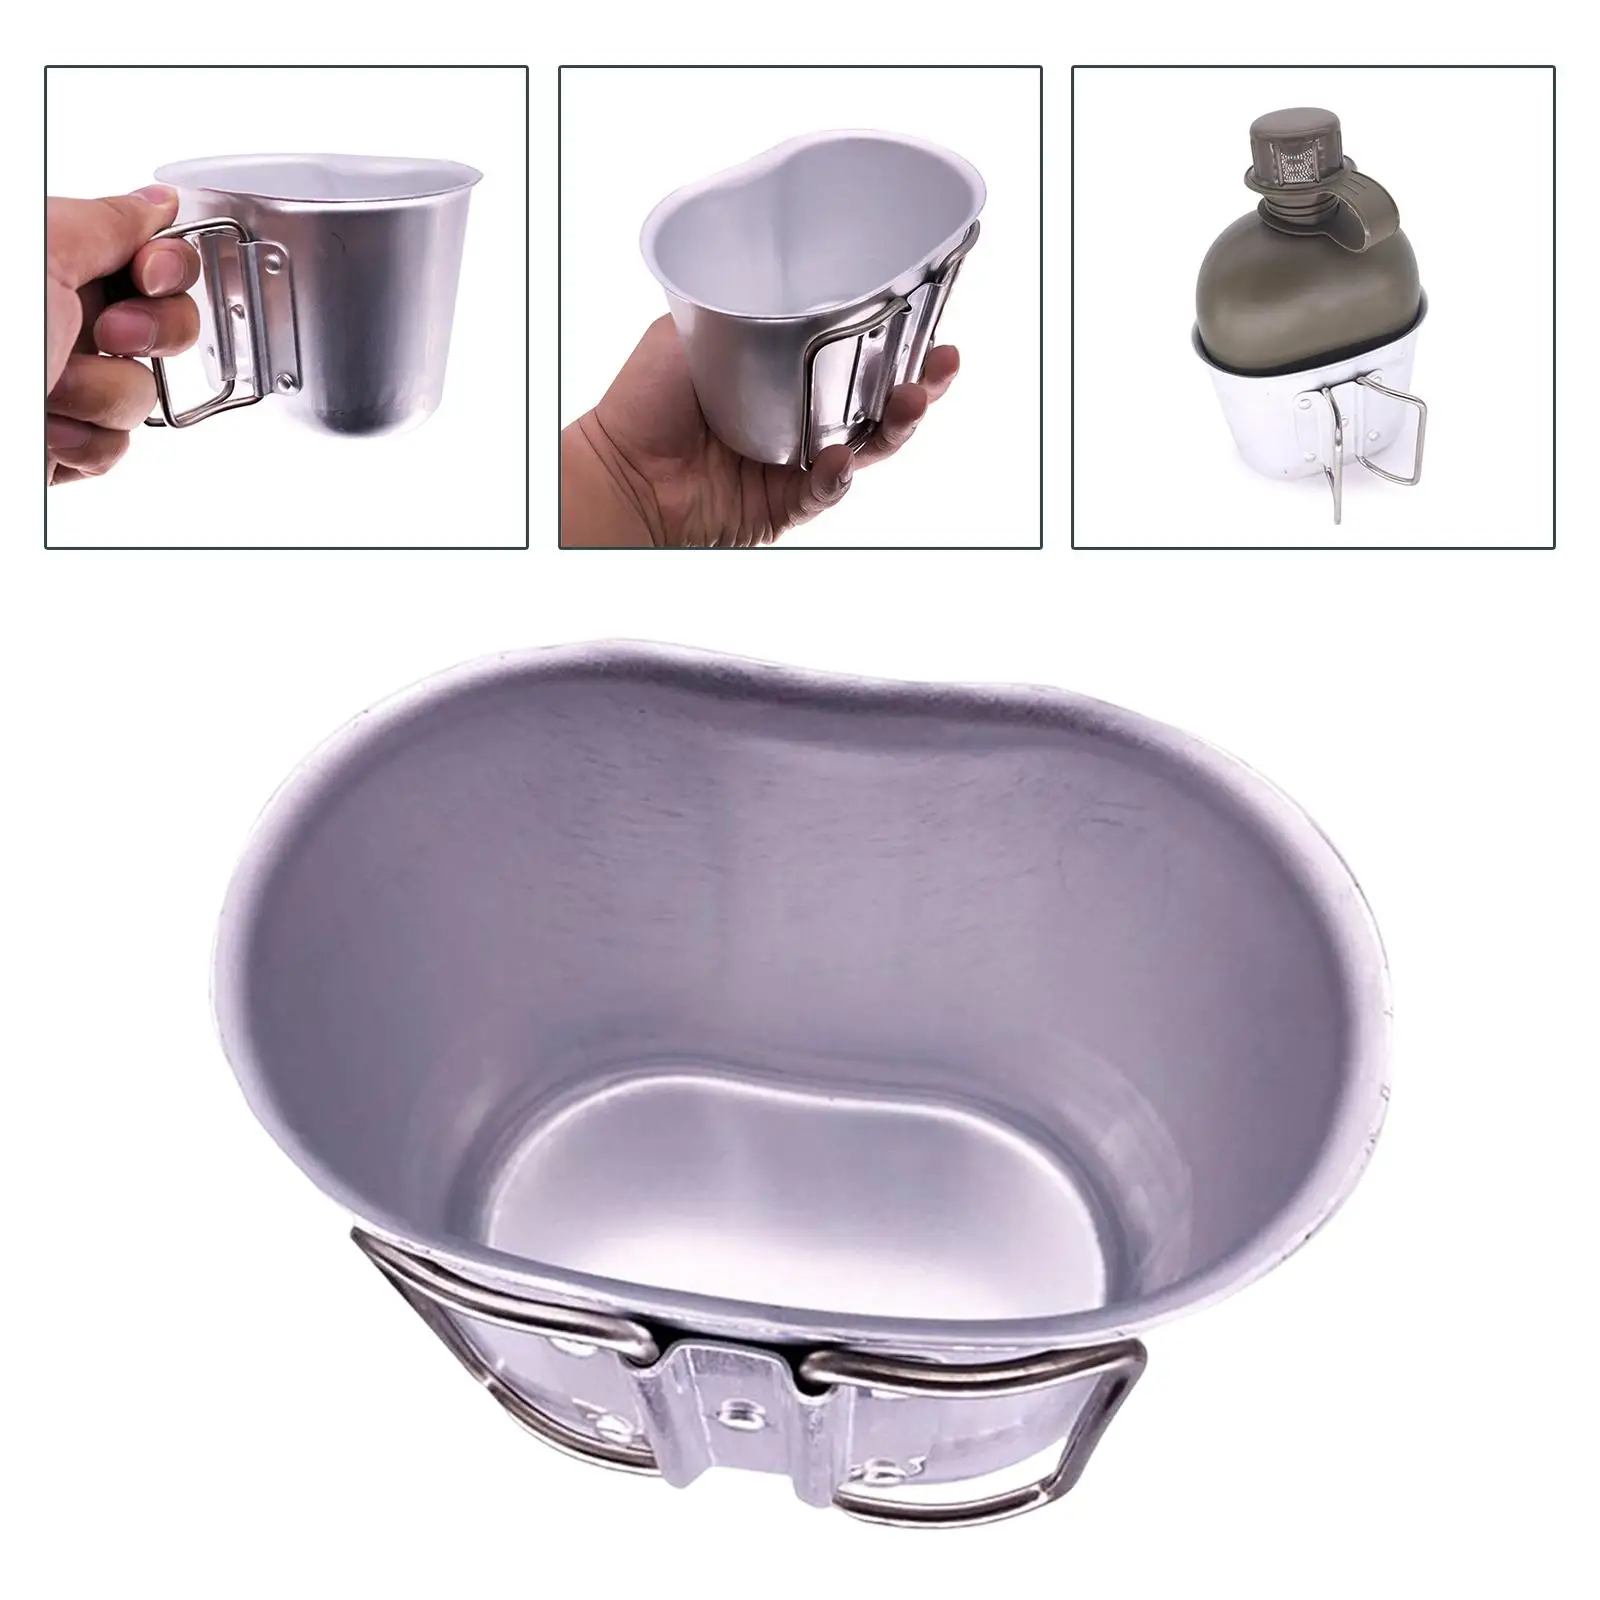 Multifunctional Camping Cookware Cup Lunchbox Foldable Teacup Reusable Durable Container 600ml Food Containe for Travel Picnic